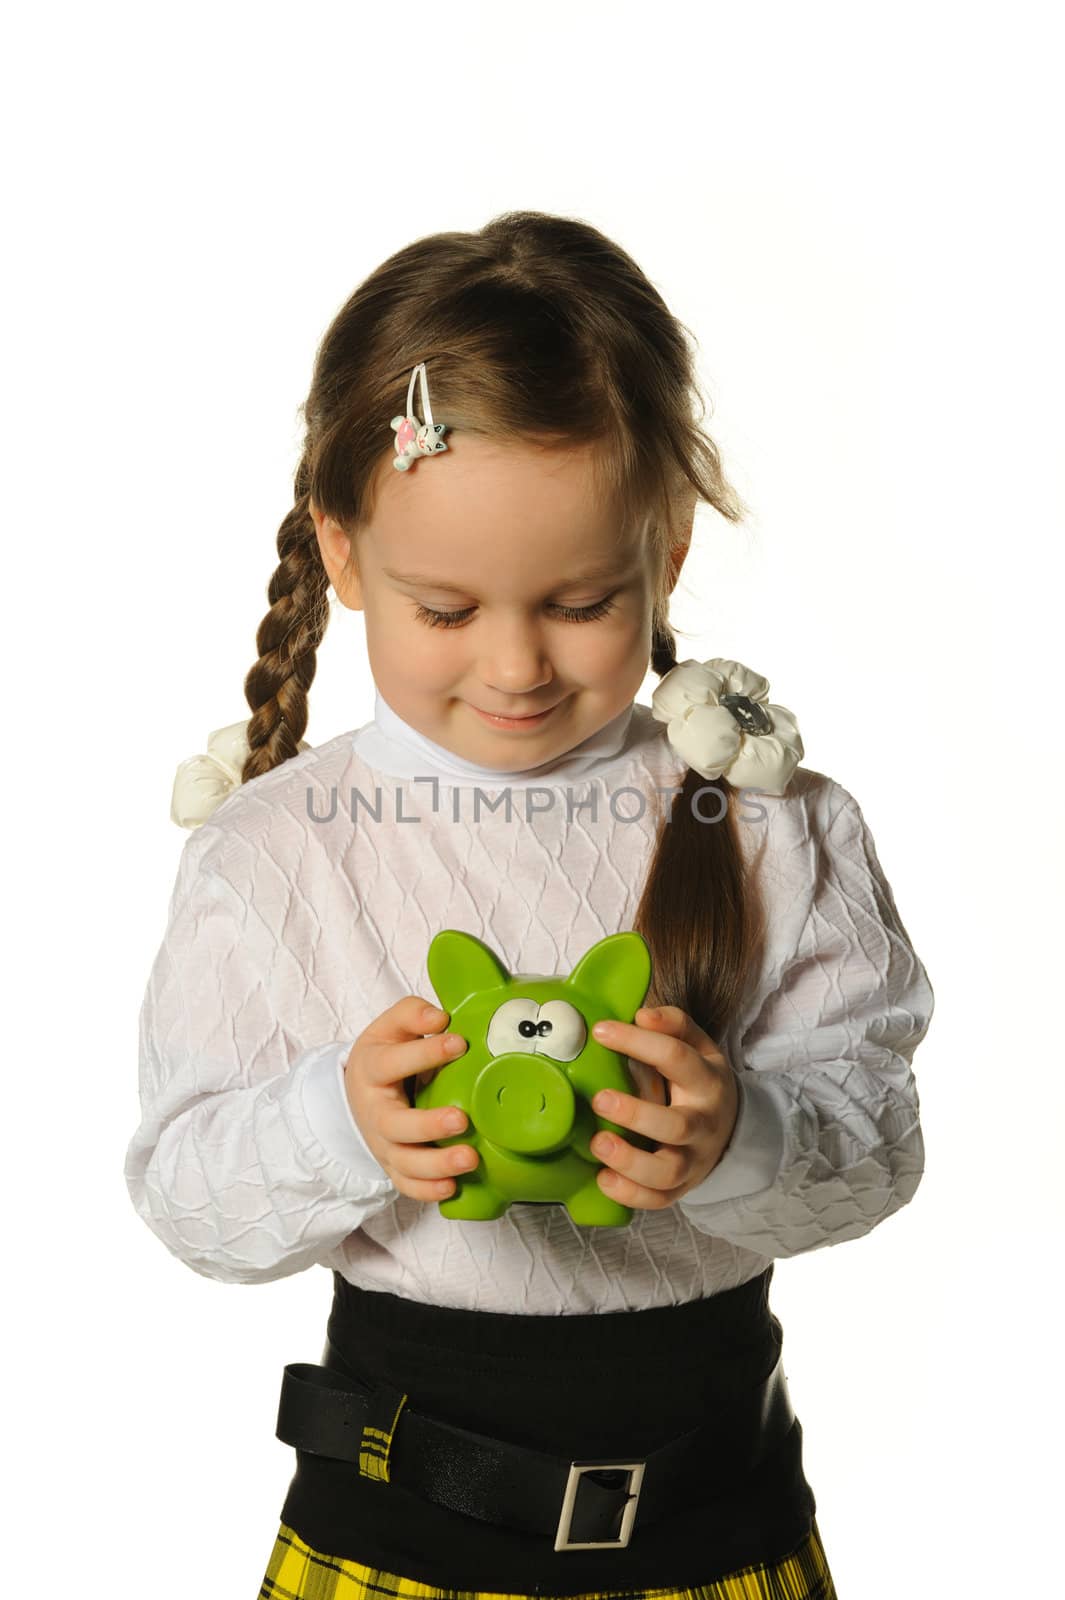 The little girl with a money box - a pig. It is isolated on a white background